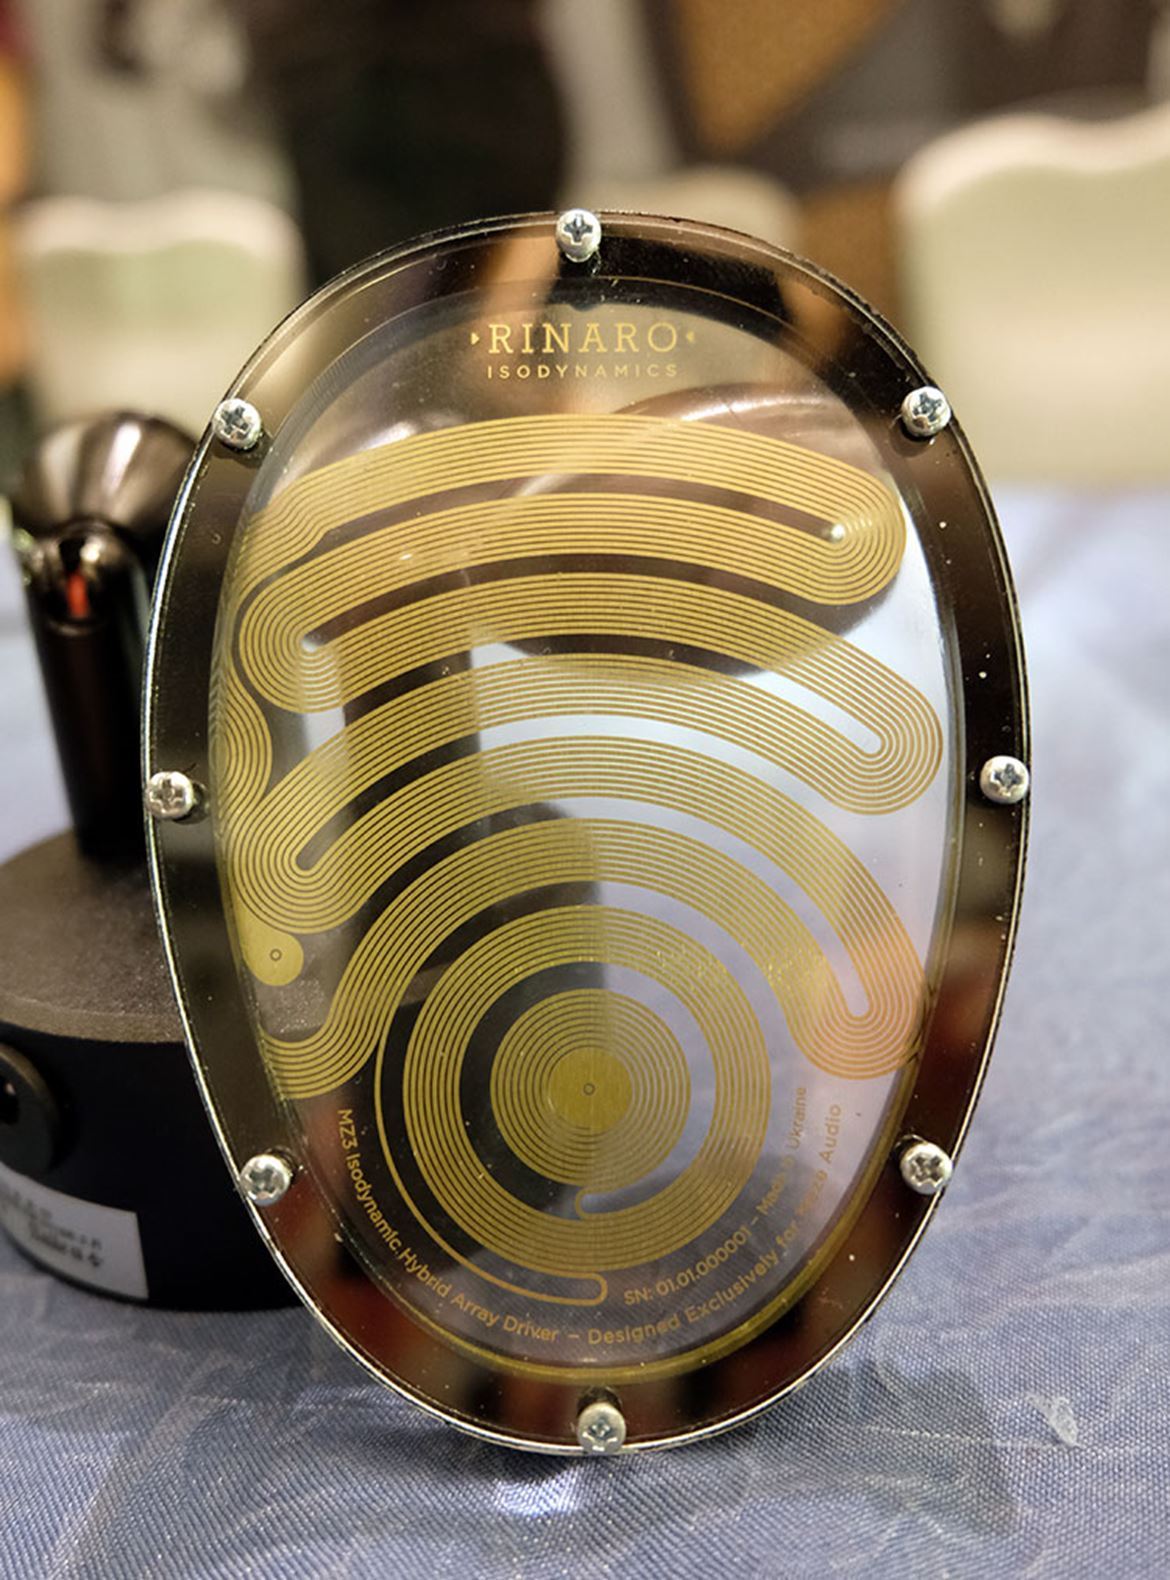 The diaphragm and voice coil of the isodynamic hybrid unit Rinaro MZ3